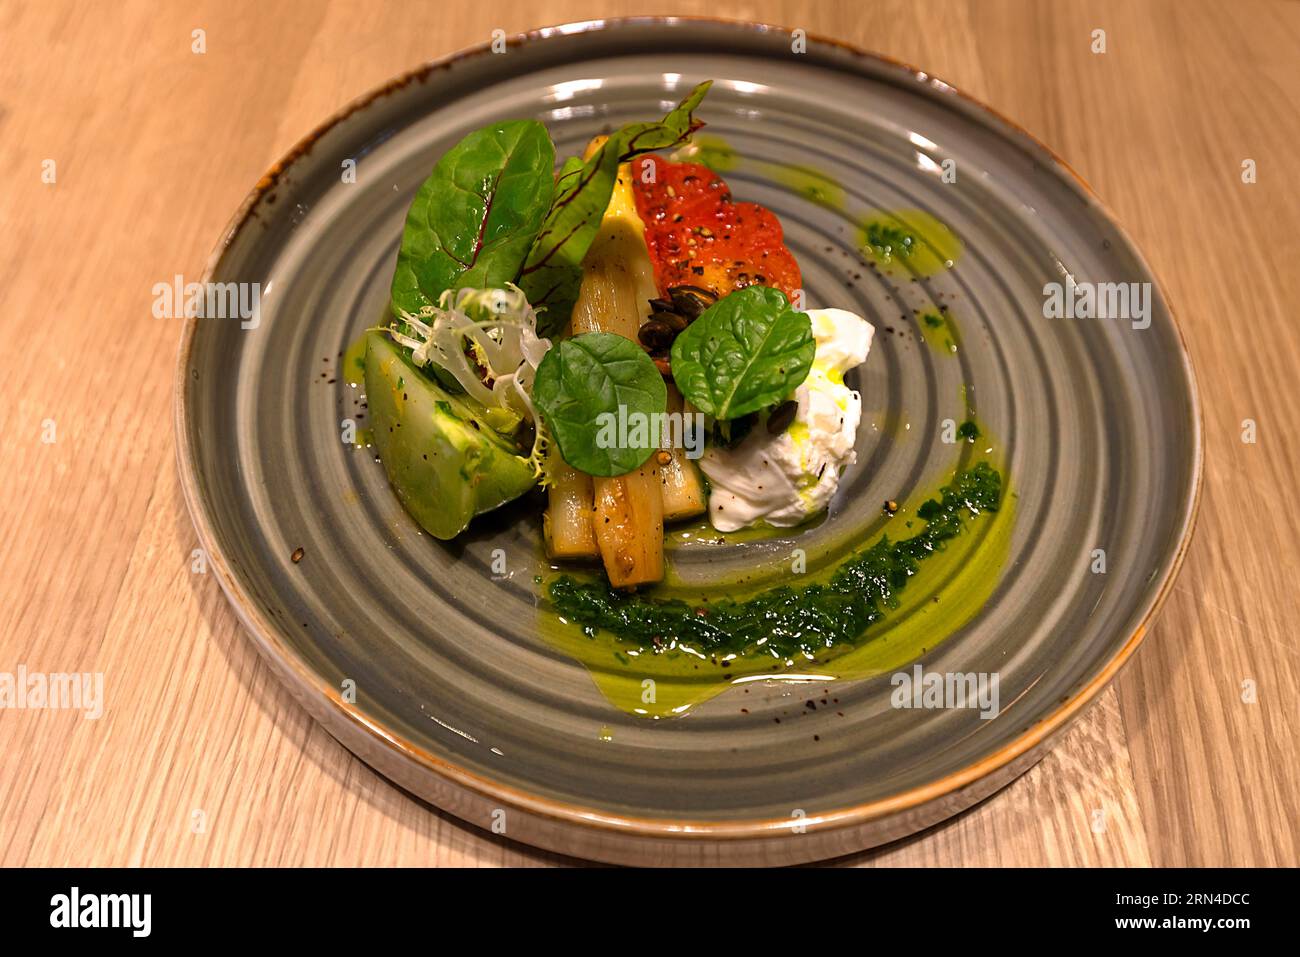 Starter plate with asparagus, salad, burrata, tomatoes and herb pesto, Baden-Wuerttemberg, Germany Stock Photo